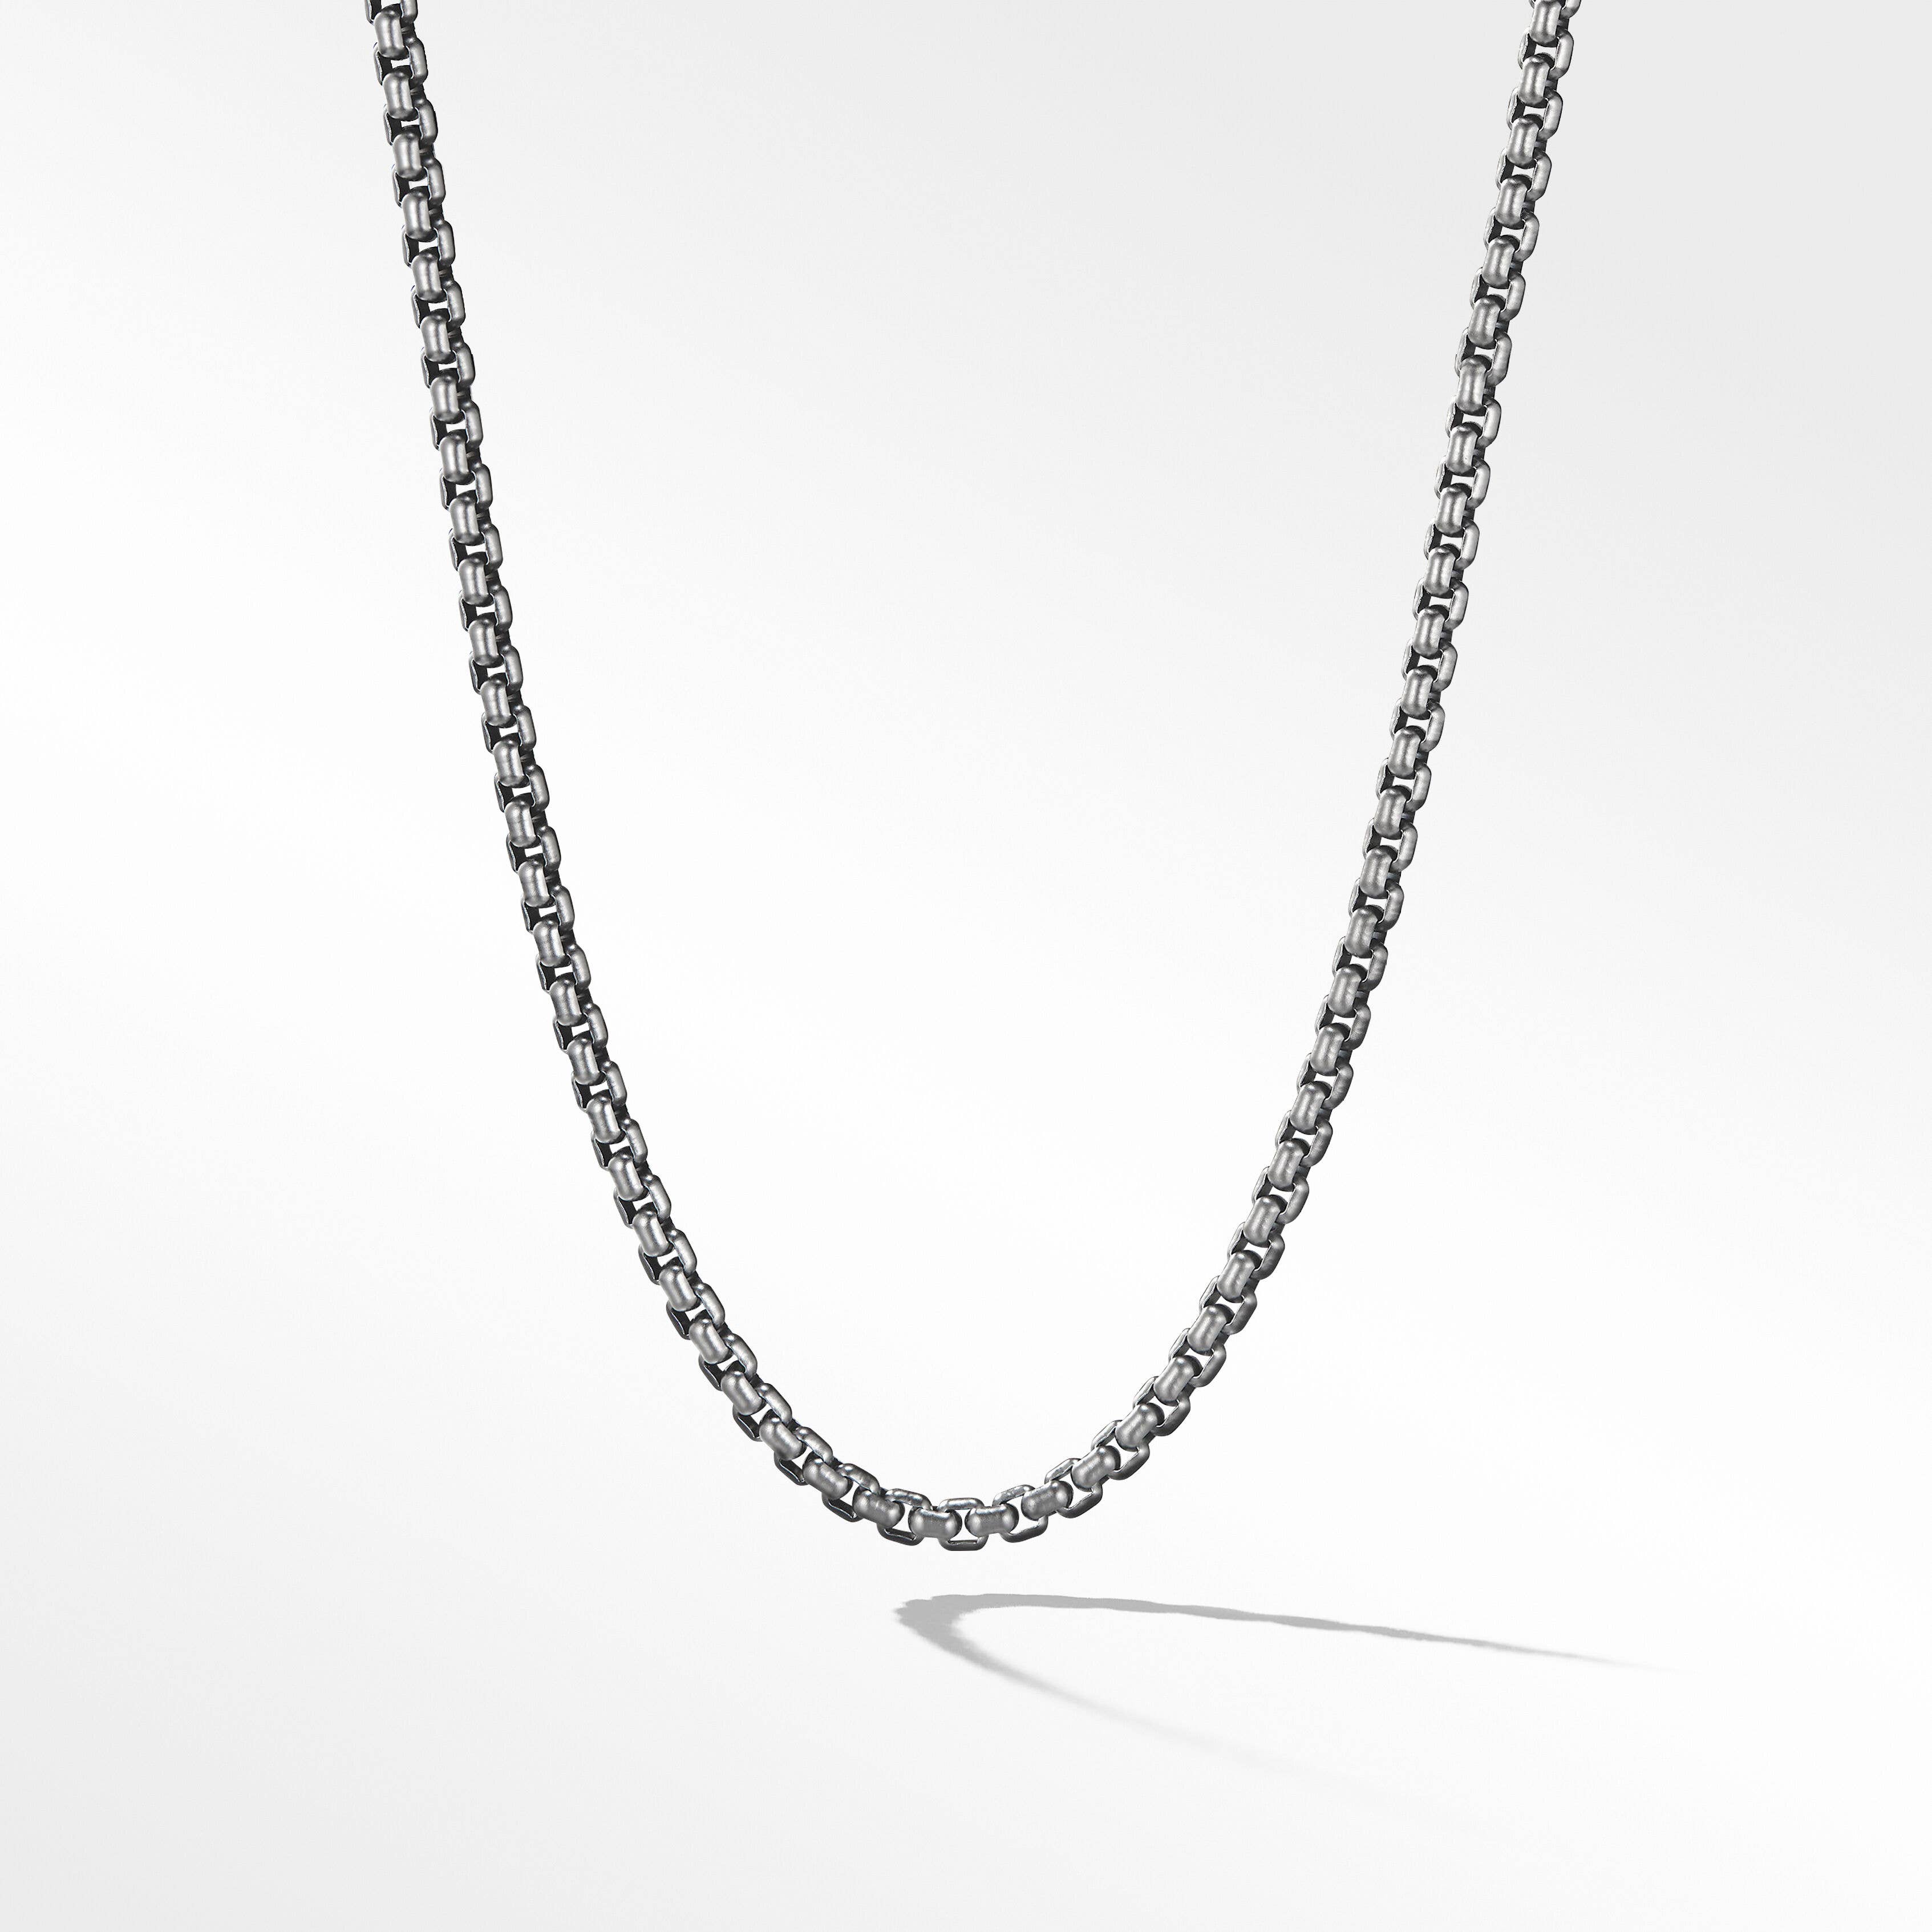 Box Chain Necklace in Darkened Stainless Steel, 4mm